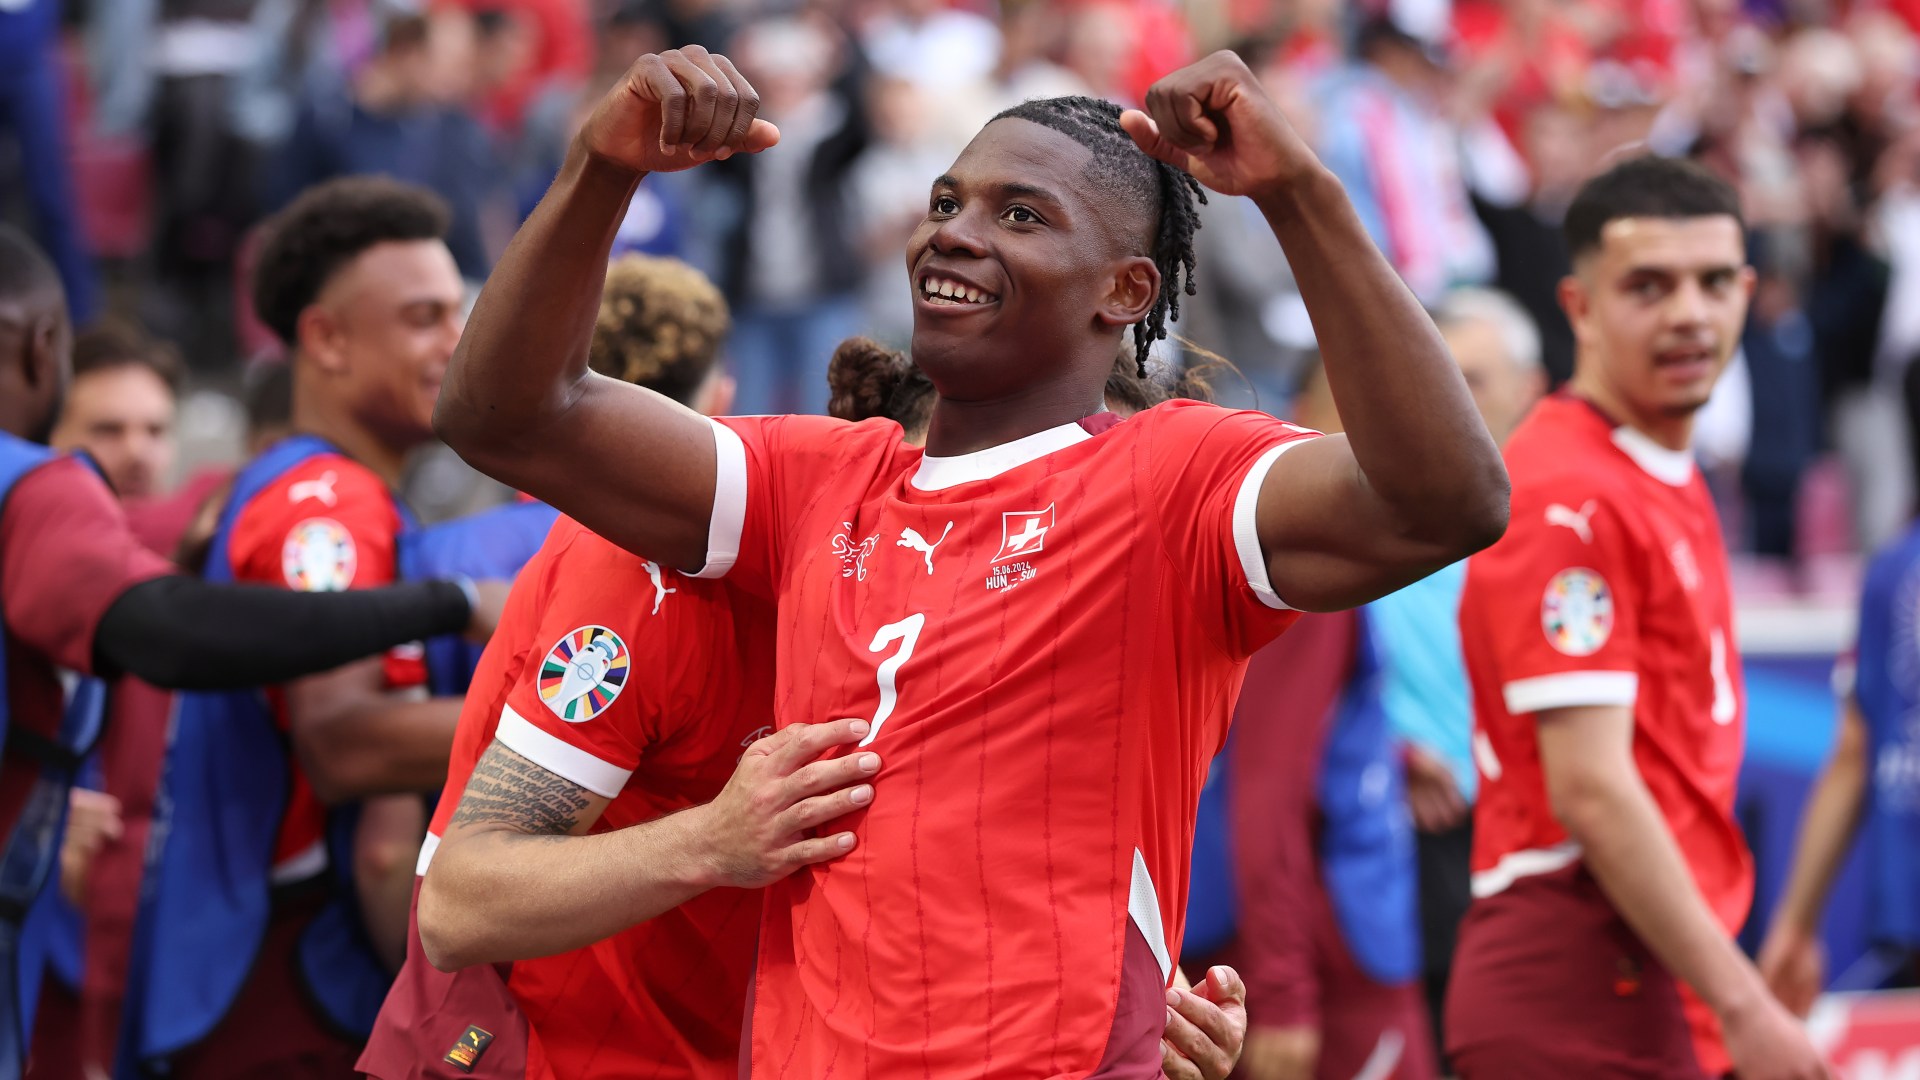 Hungary vs Switzerland LIVE SCORE: Embolo seals Euro 2024 win with audacious lob to fend off late fight back - updates